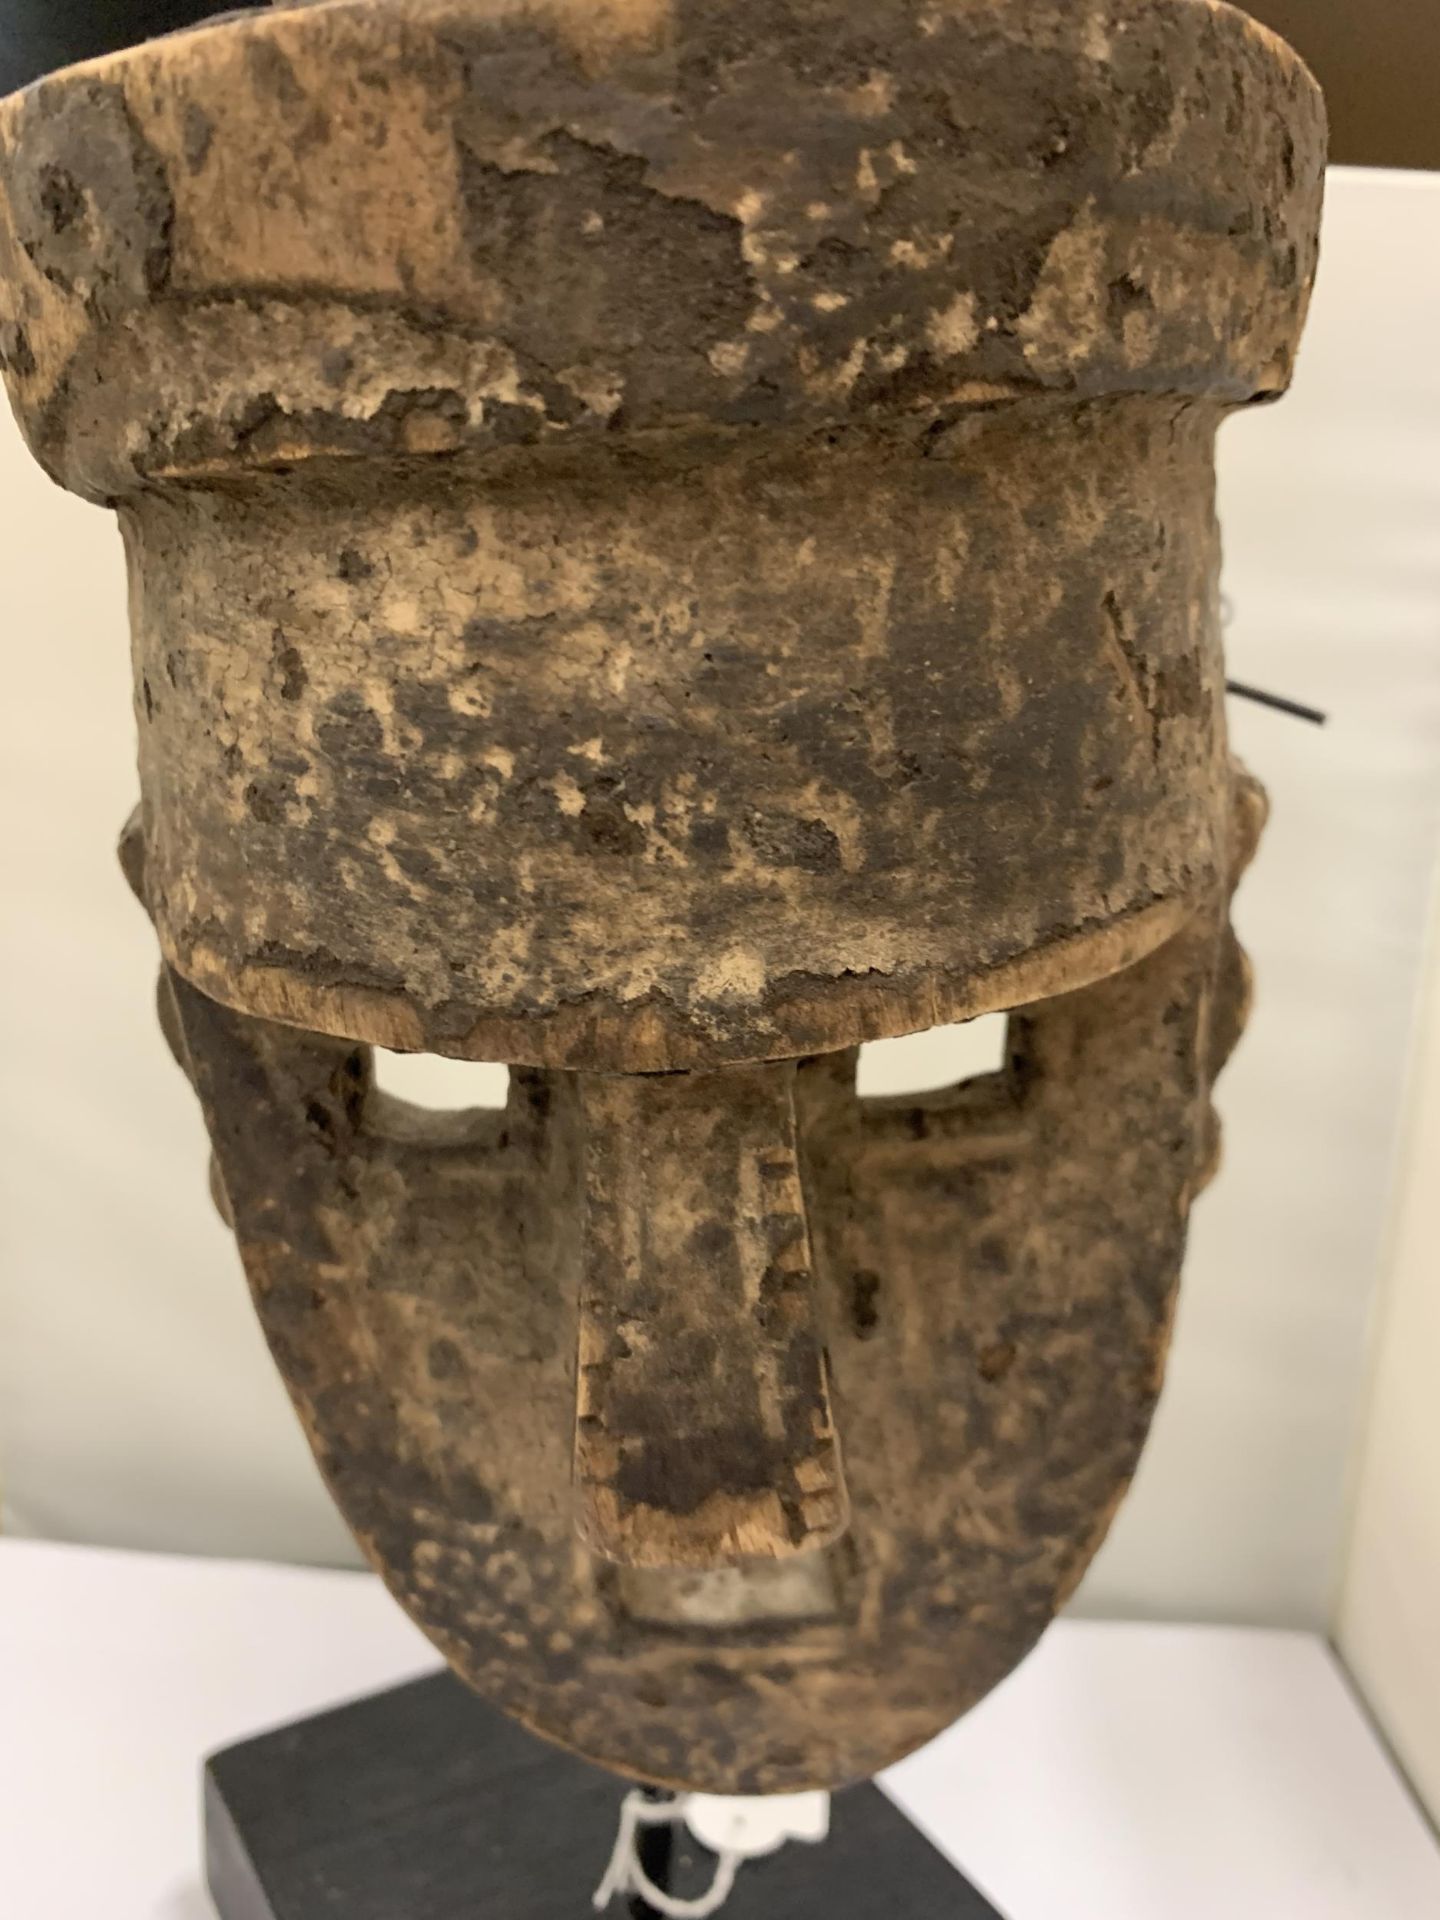 A LATE 19TH CENTURY EARLY 20TH CENTURY MALI DOGON MASK ON A MUSEUM STYLE STAND - Image 2 of 4